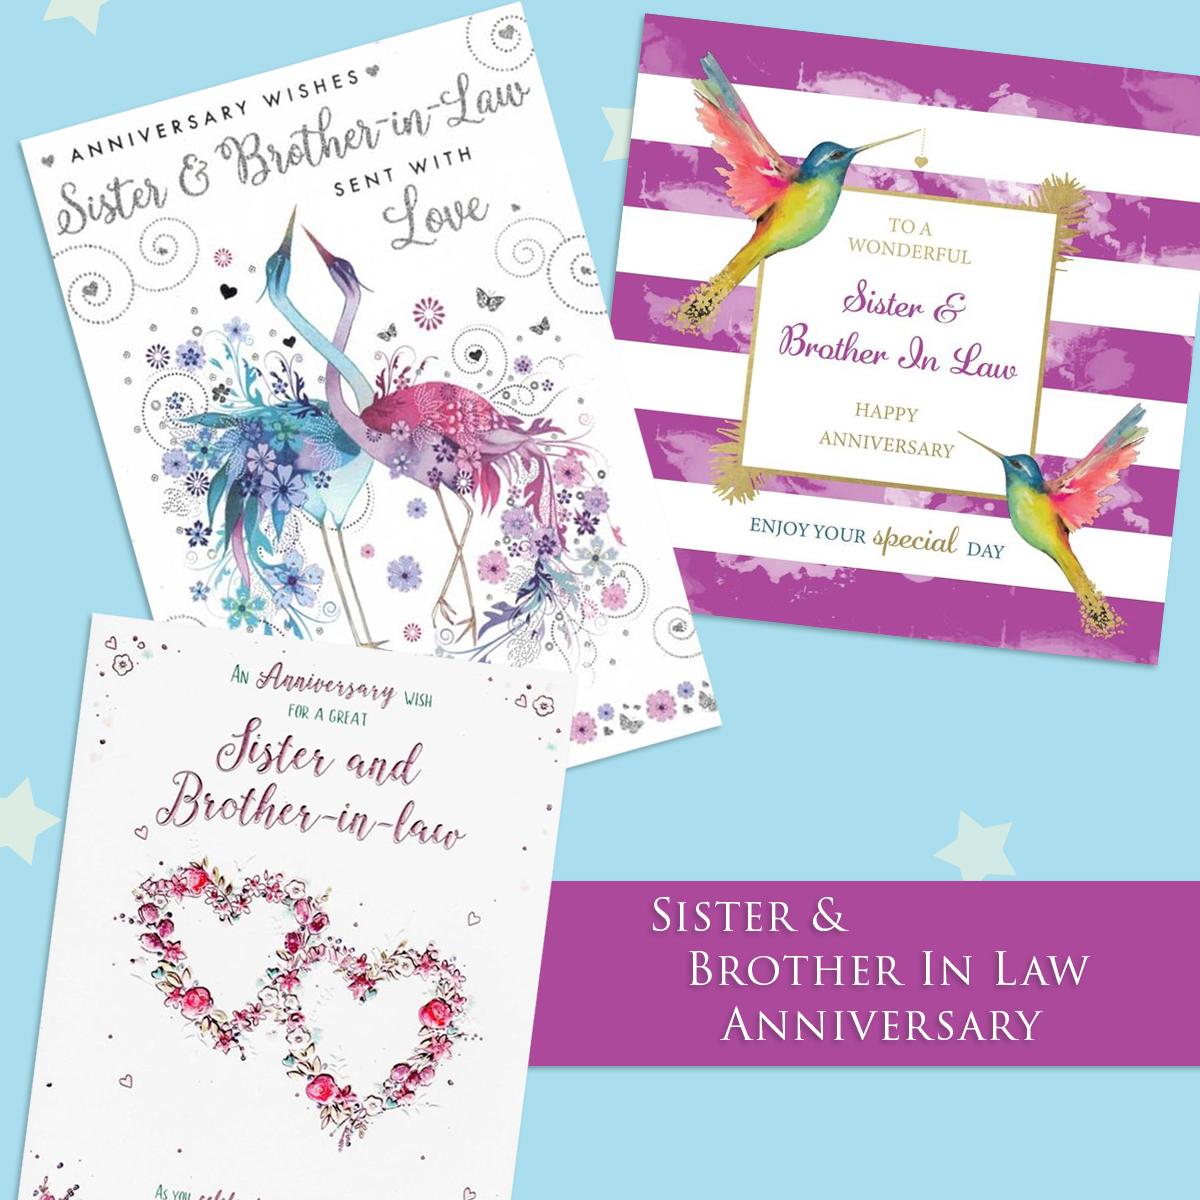 A Selection Of Cards To Show The Depth Of Range In Our Sister & Brother In Law Anniversary Section